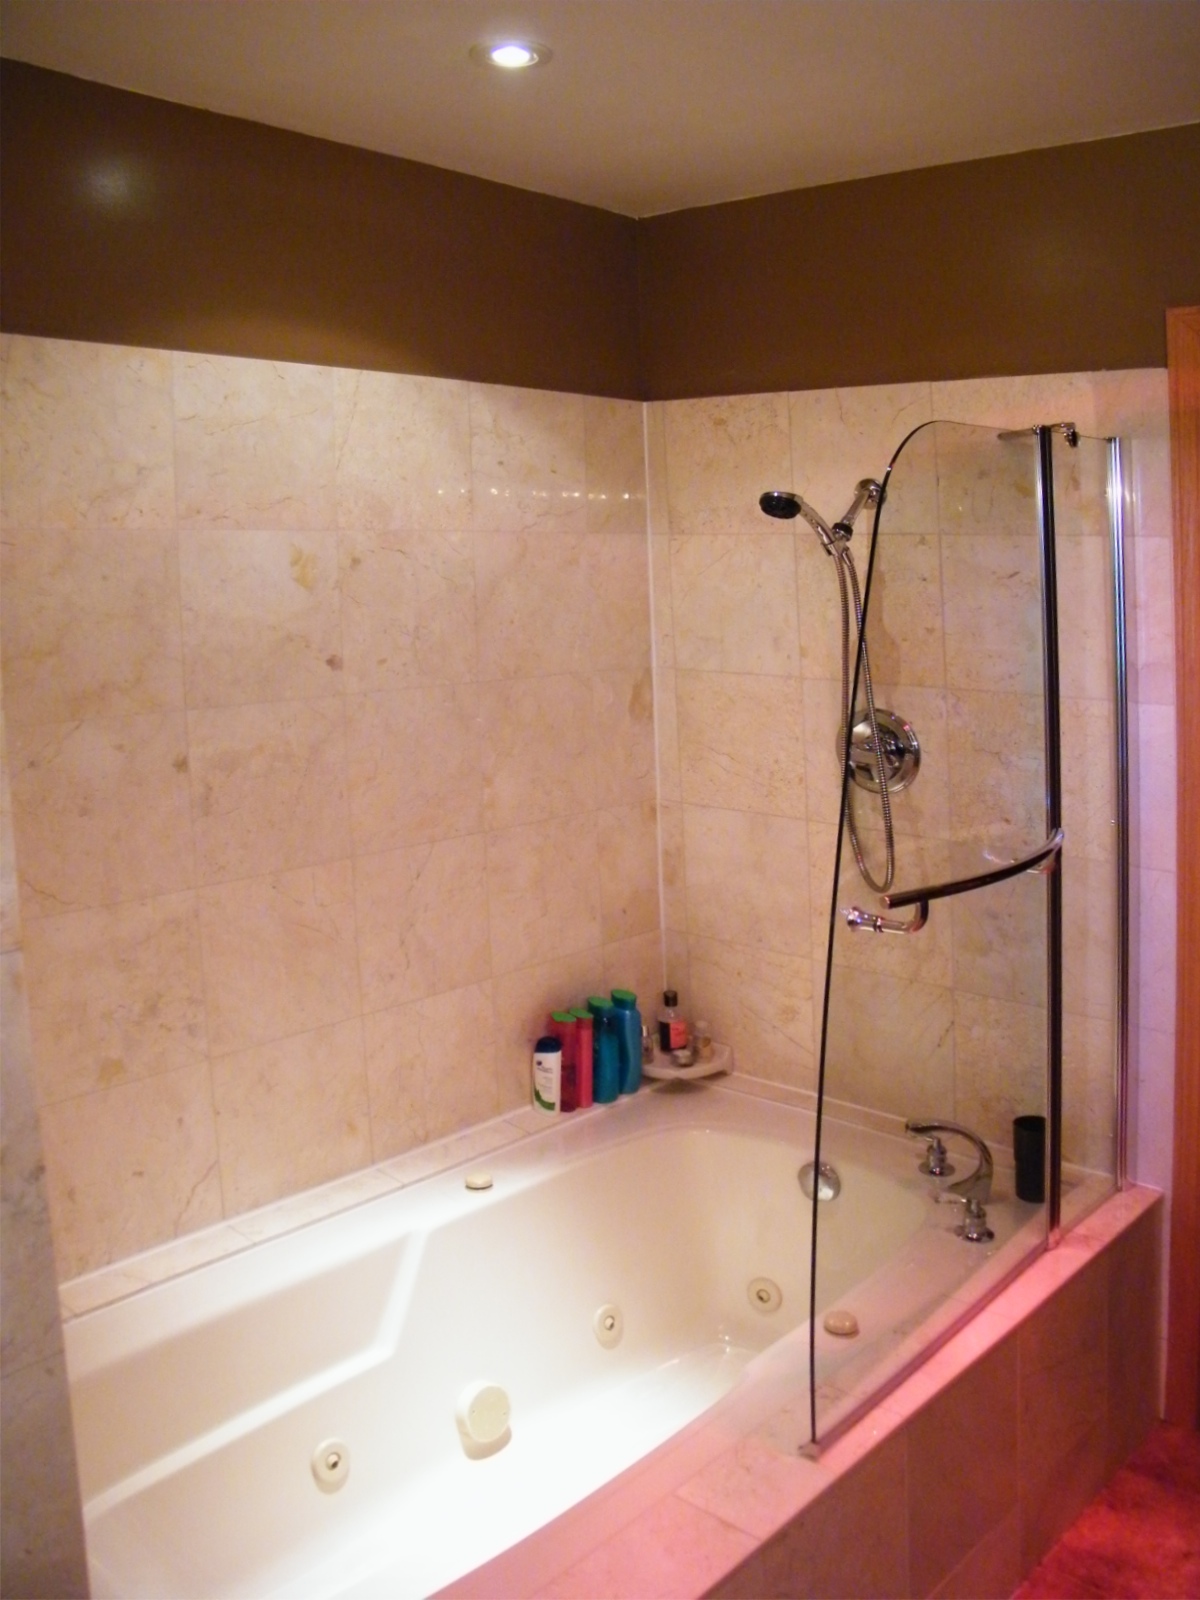 Whirlpool Tub with Shower Surround